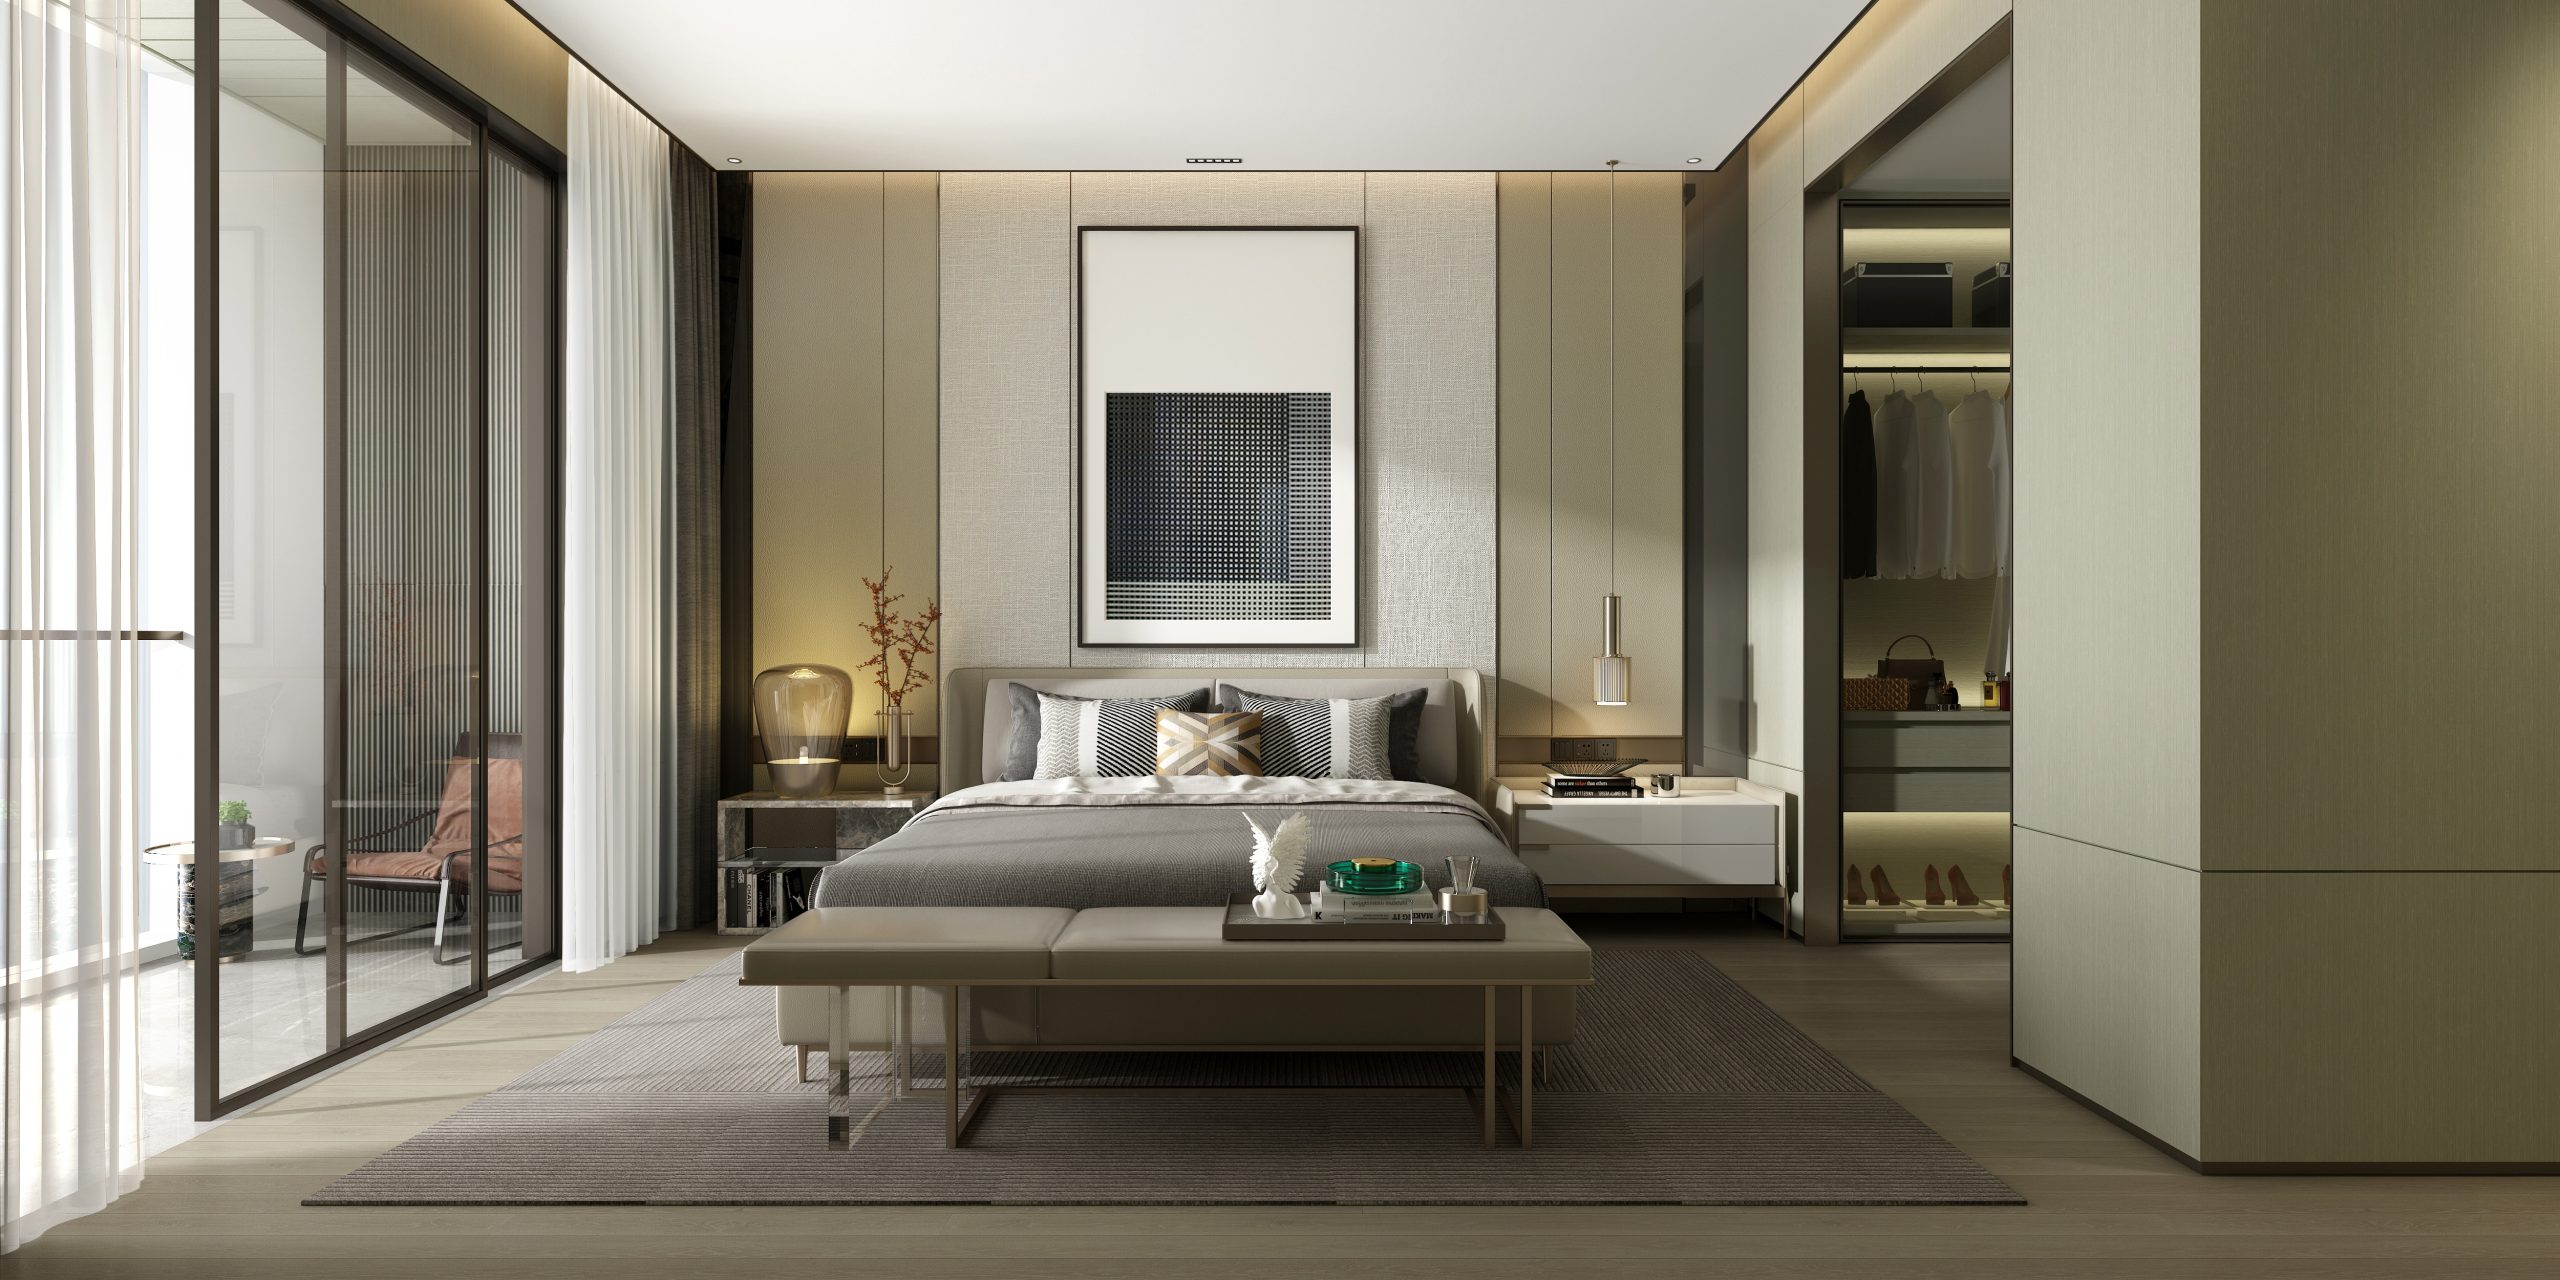 Incorporate the quiet luxury trend into your home